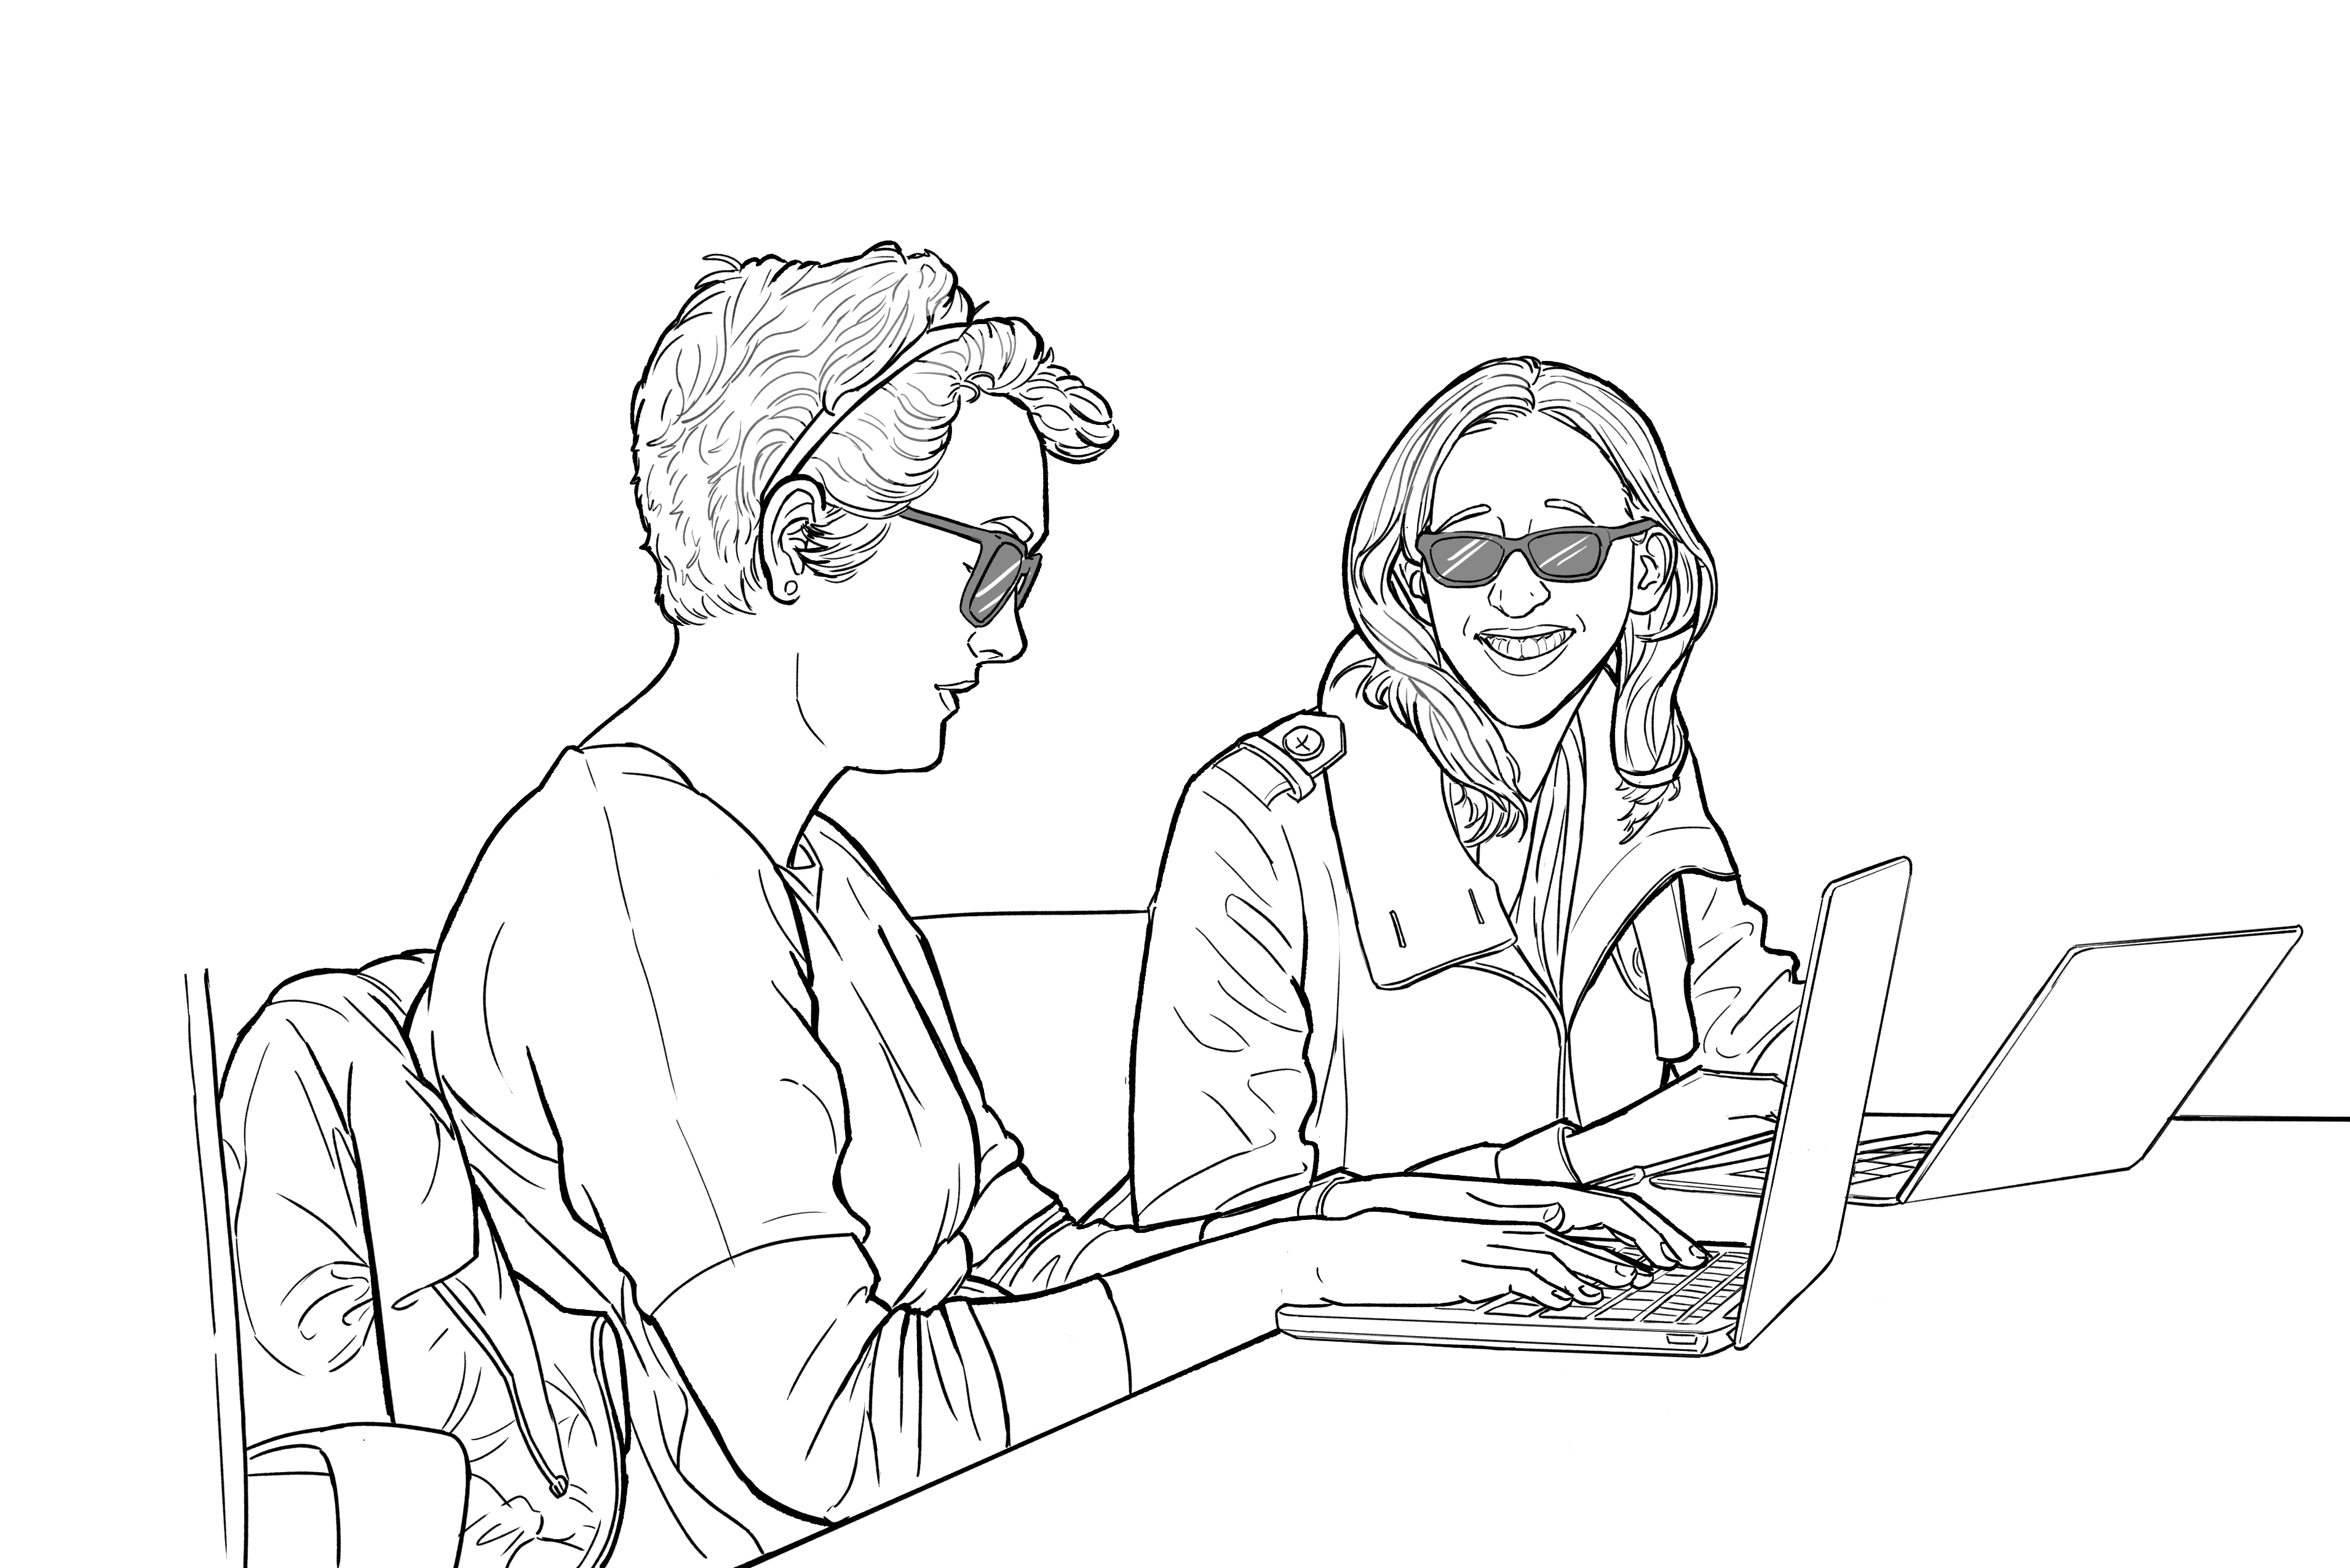 Two people on separate laptops, both with sunglasses, one smiling and the other typing.